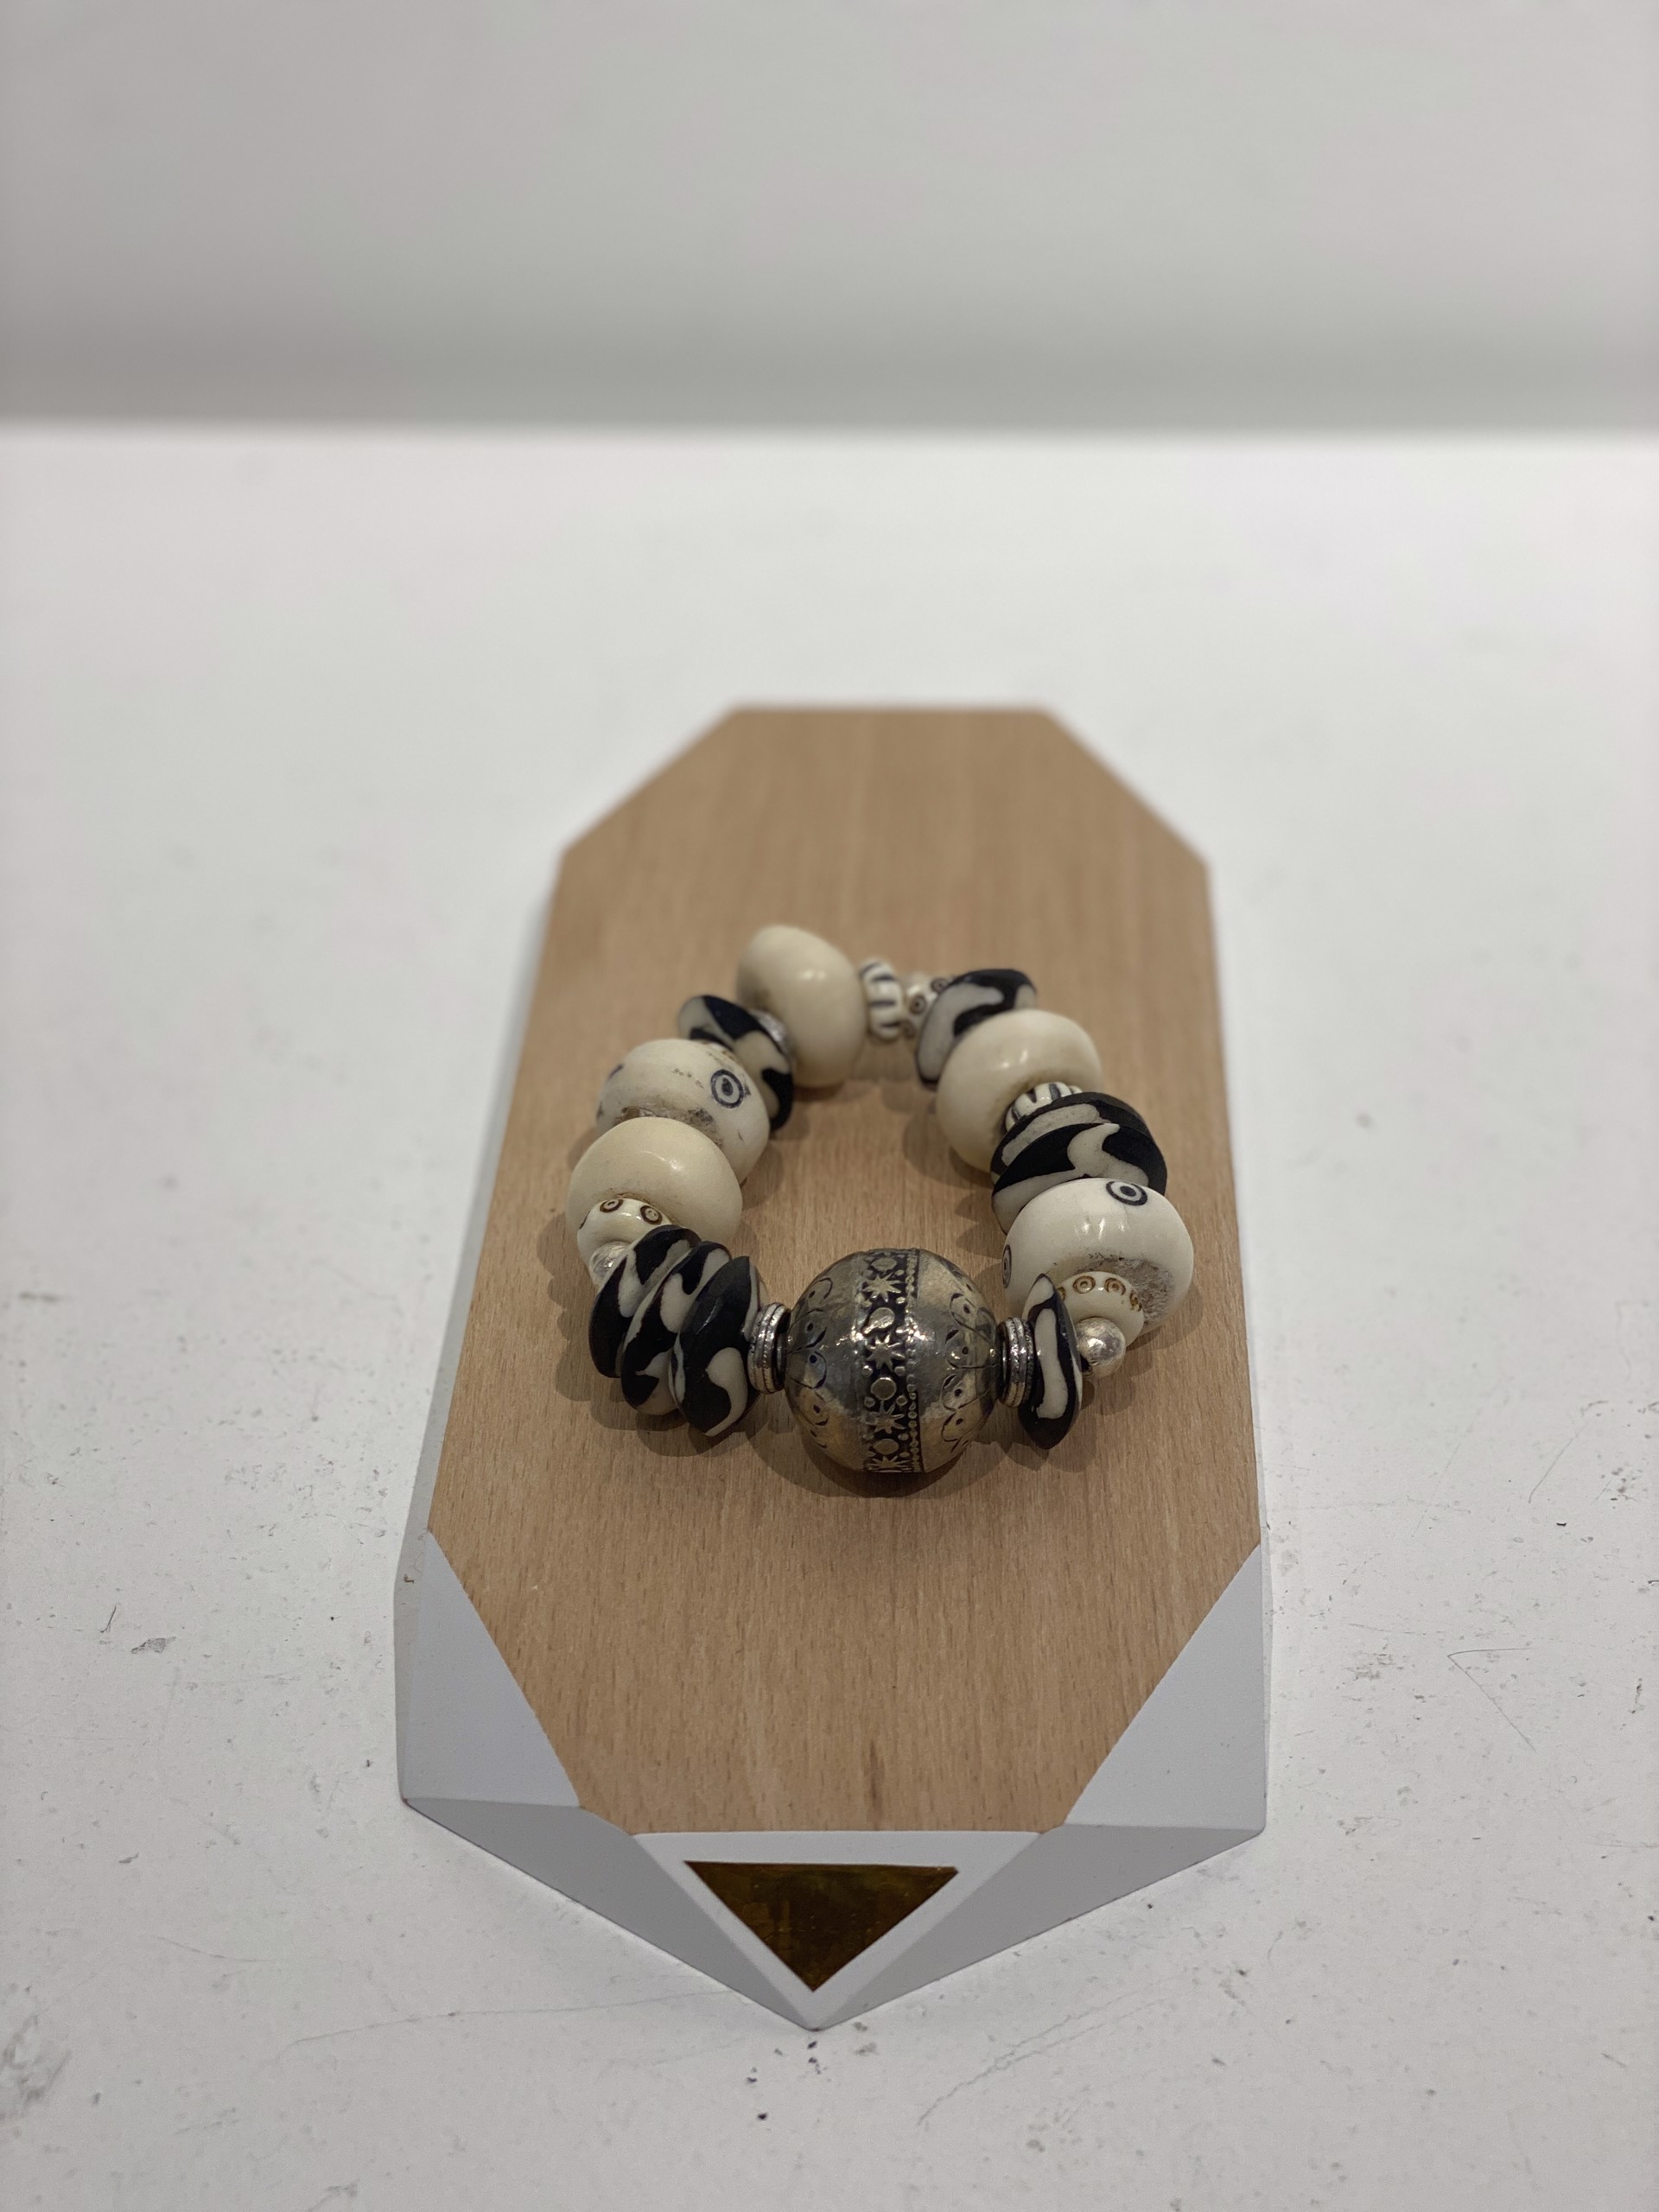 Moroccan silver and African bone beads #4 by Melissa Turney